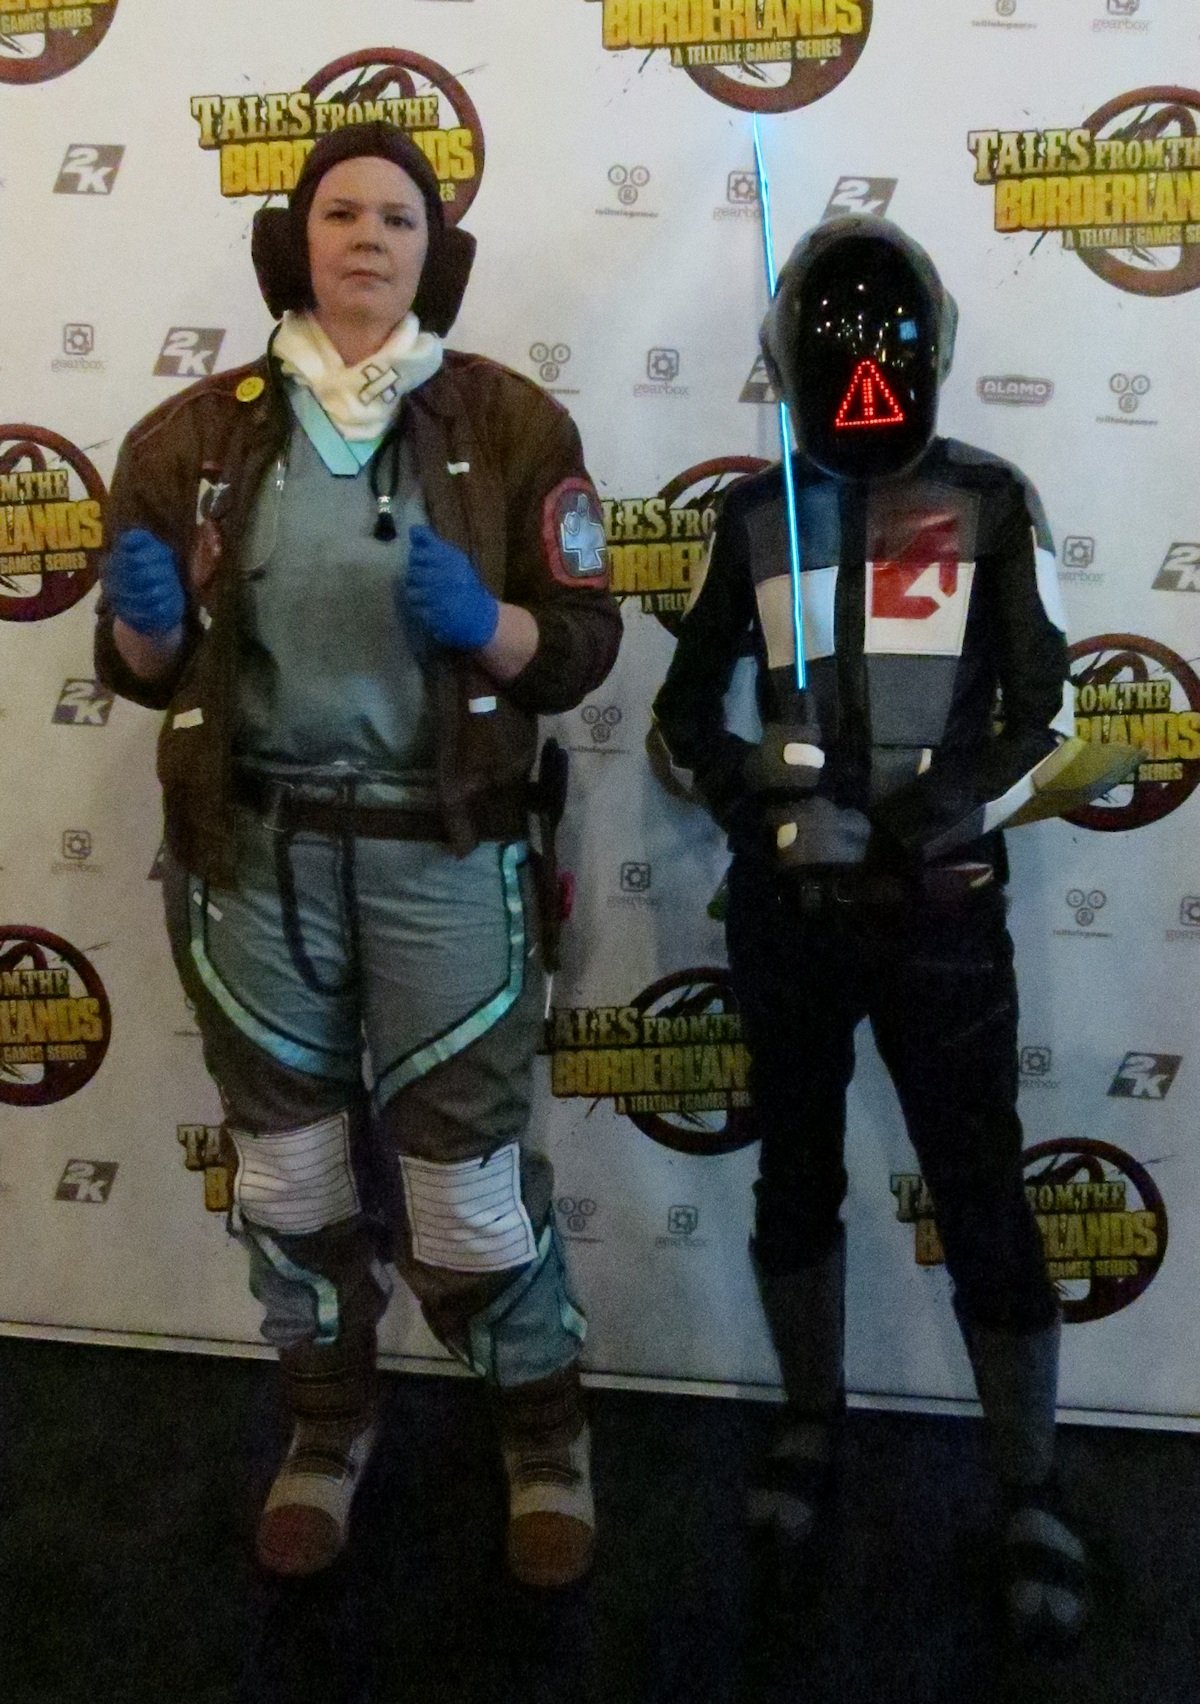 Tales from the Borderlands premiere cosplayers